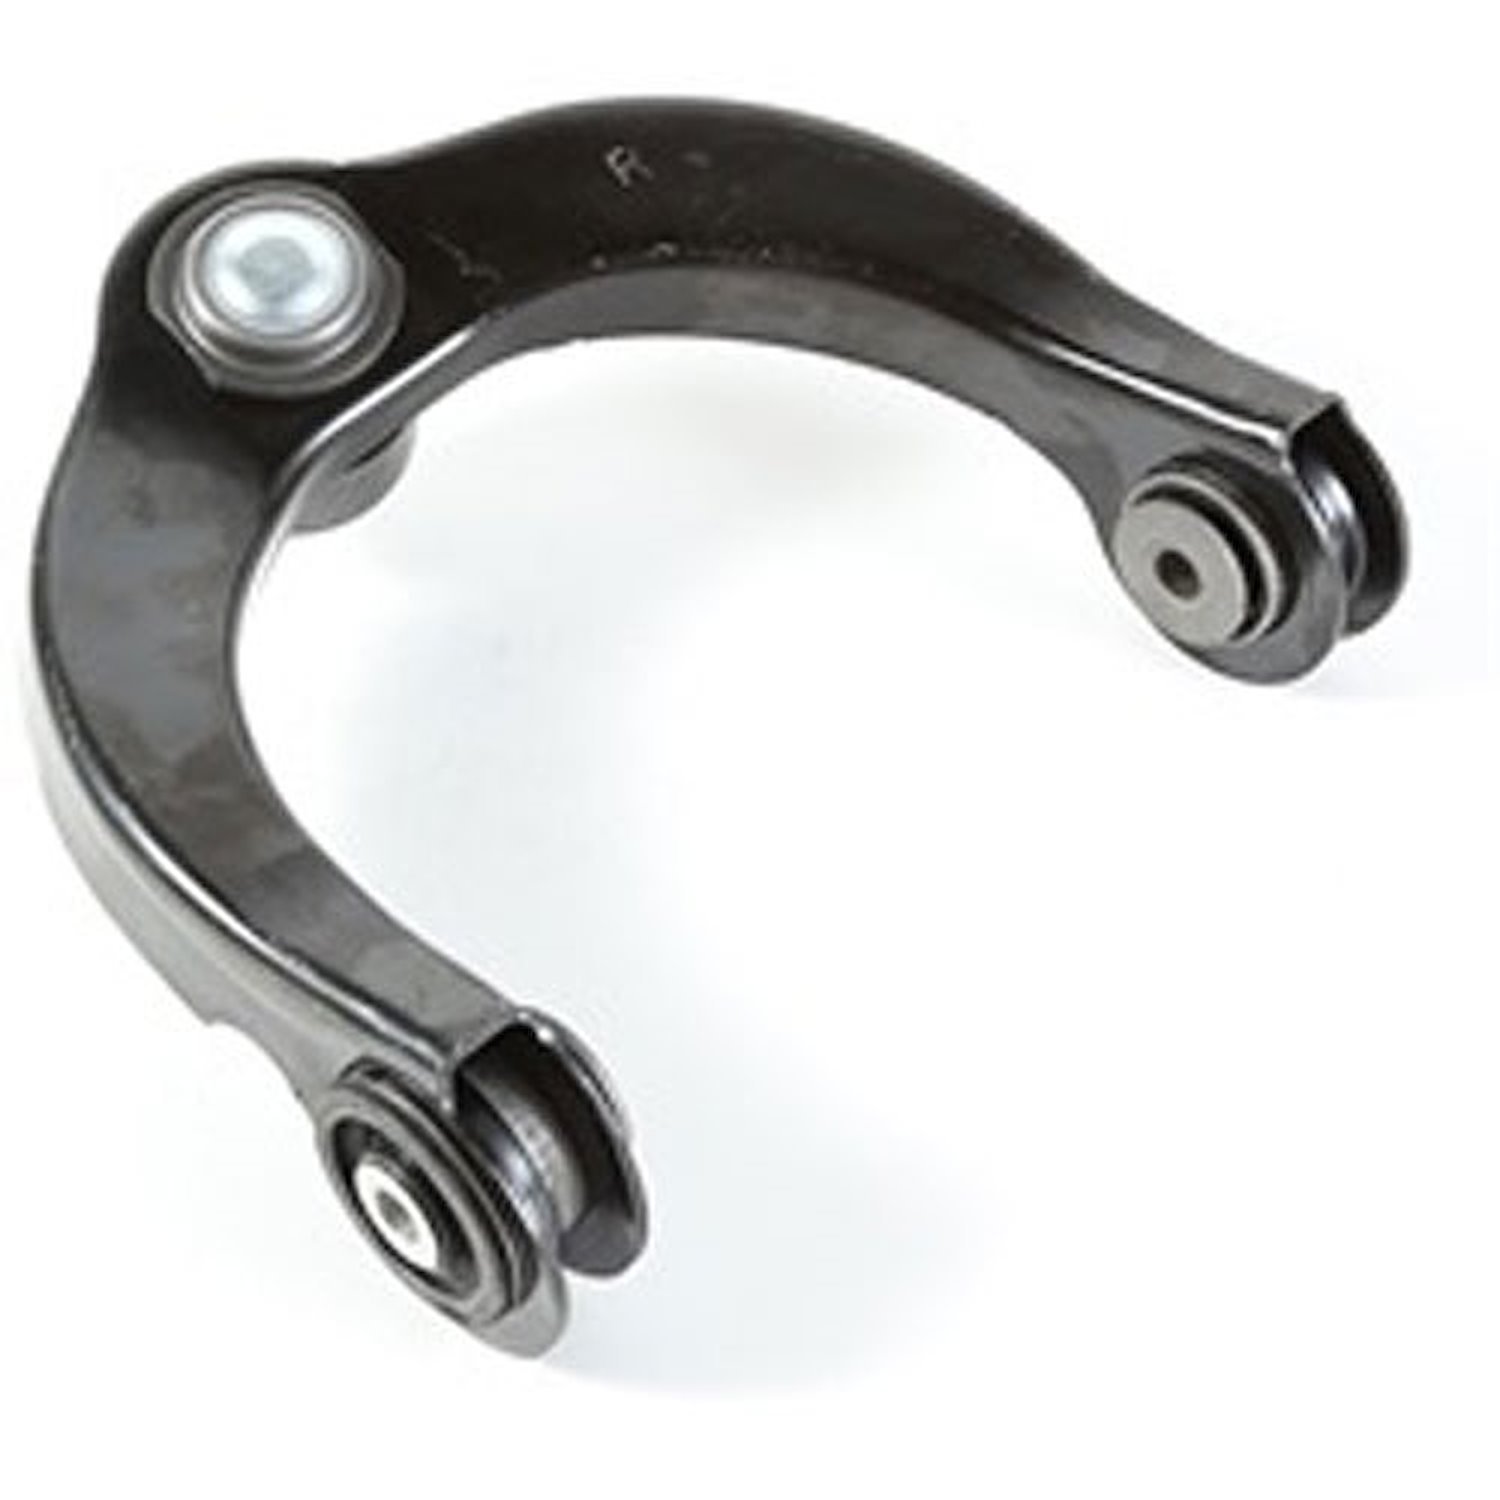 This right front upper control arm from Omix-ADA